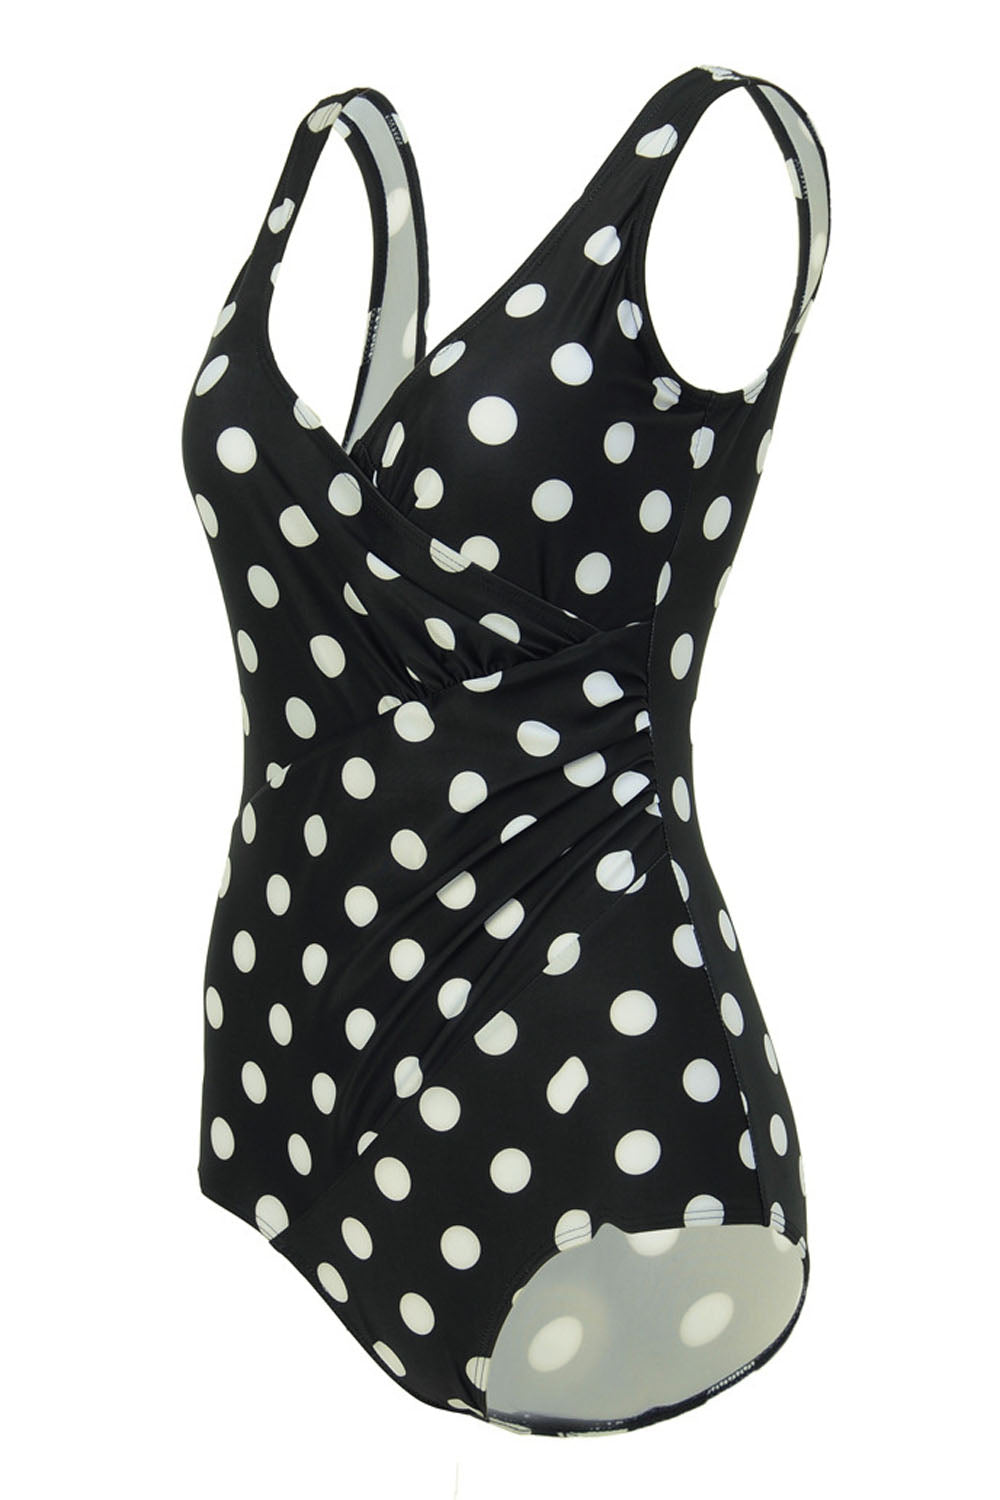 Iyasson Womens Sexy Solid Color/Polka Dot One-piece Swimsuit